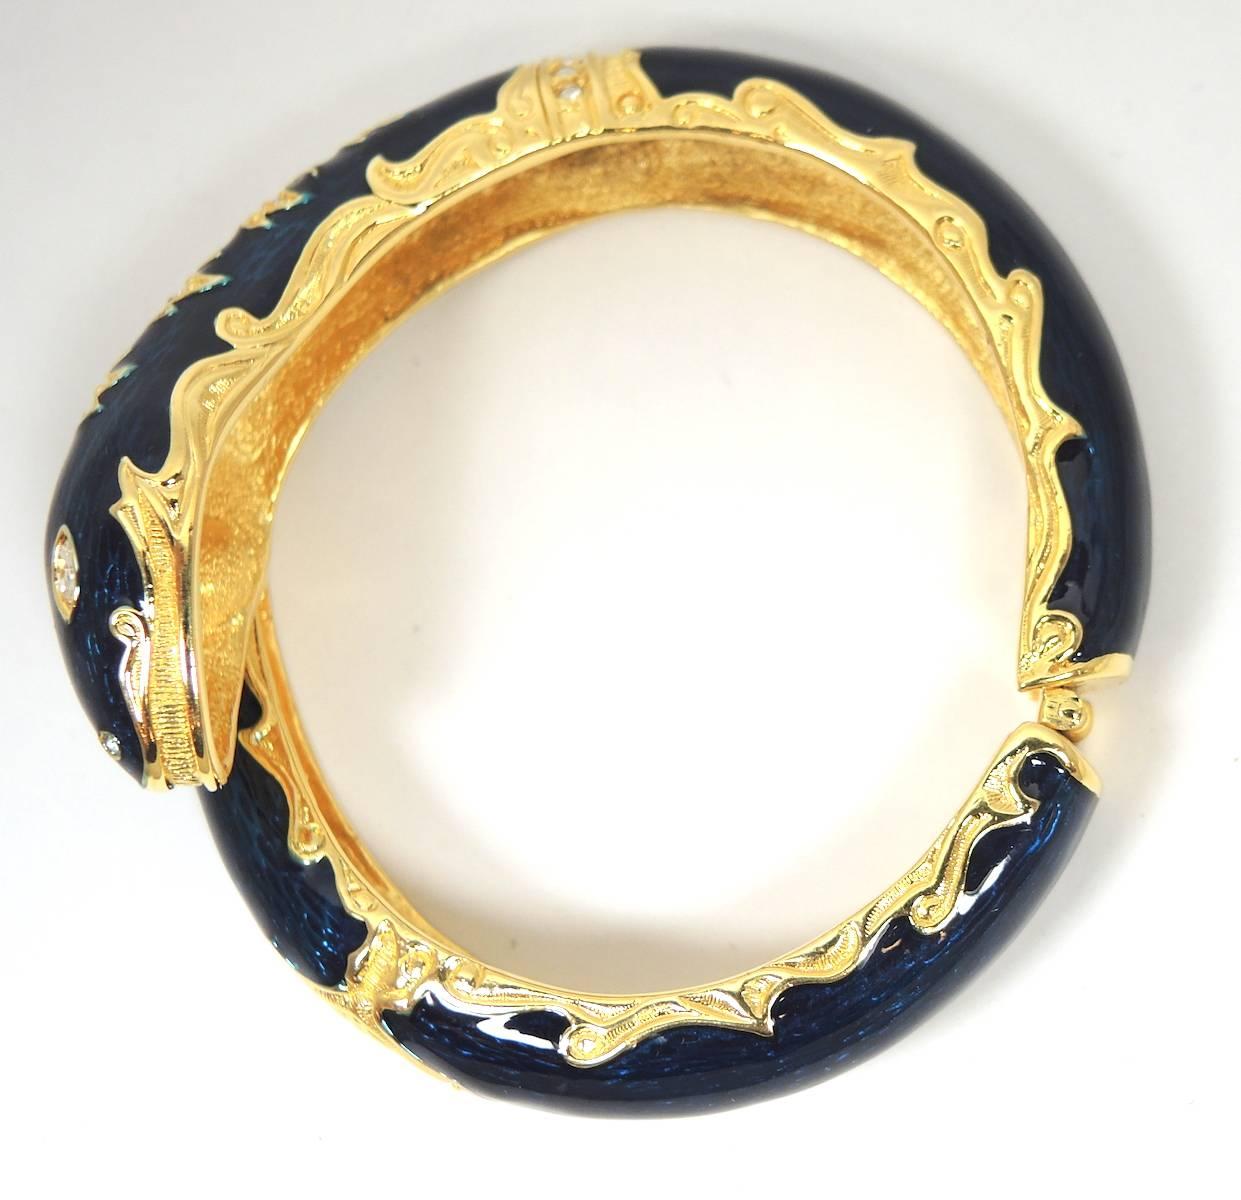 This Joan River’s bracelet features a serpent with rich midnight blue enameling and brilliant rhinestone accents in a gold tone setting. This clamper bracelet measures 2-1/8” x 1” and will fit a 7-1/2 to 8 wrist. It is signed “Joan Rivers” and is in